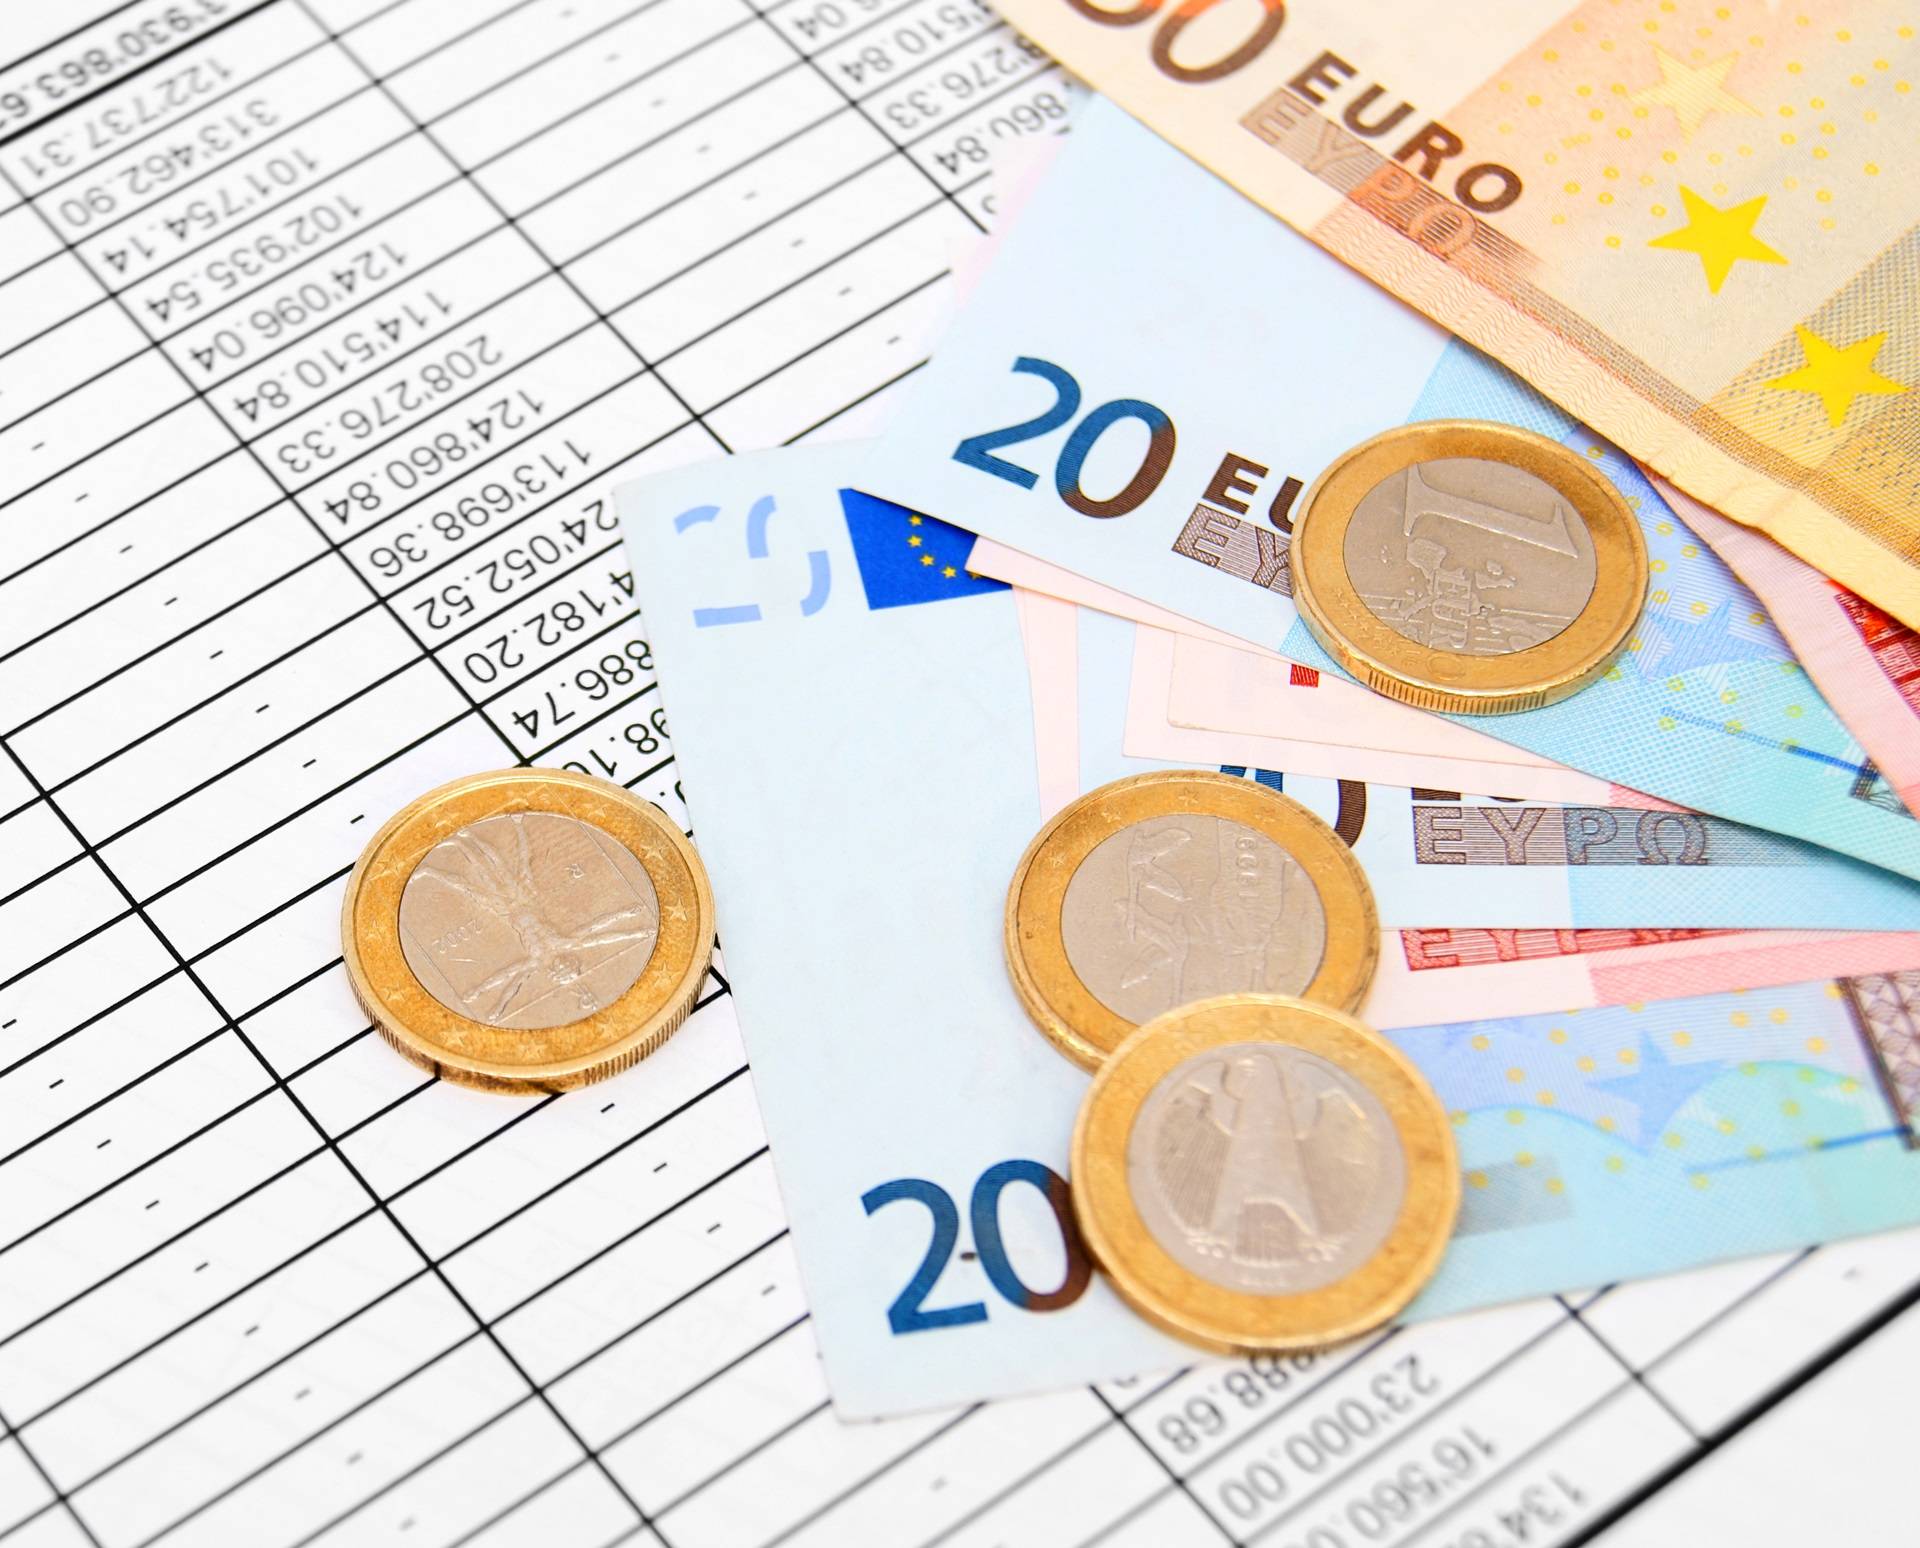 Euros money and documents